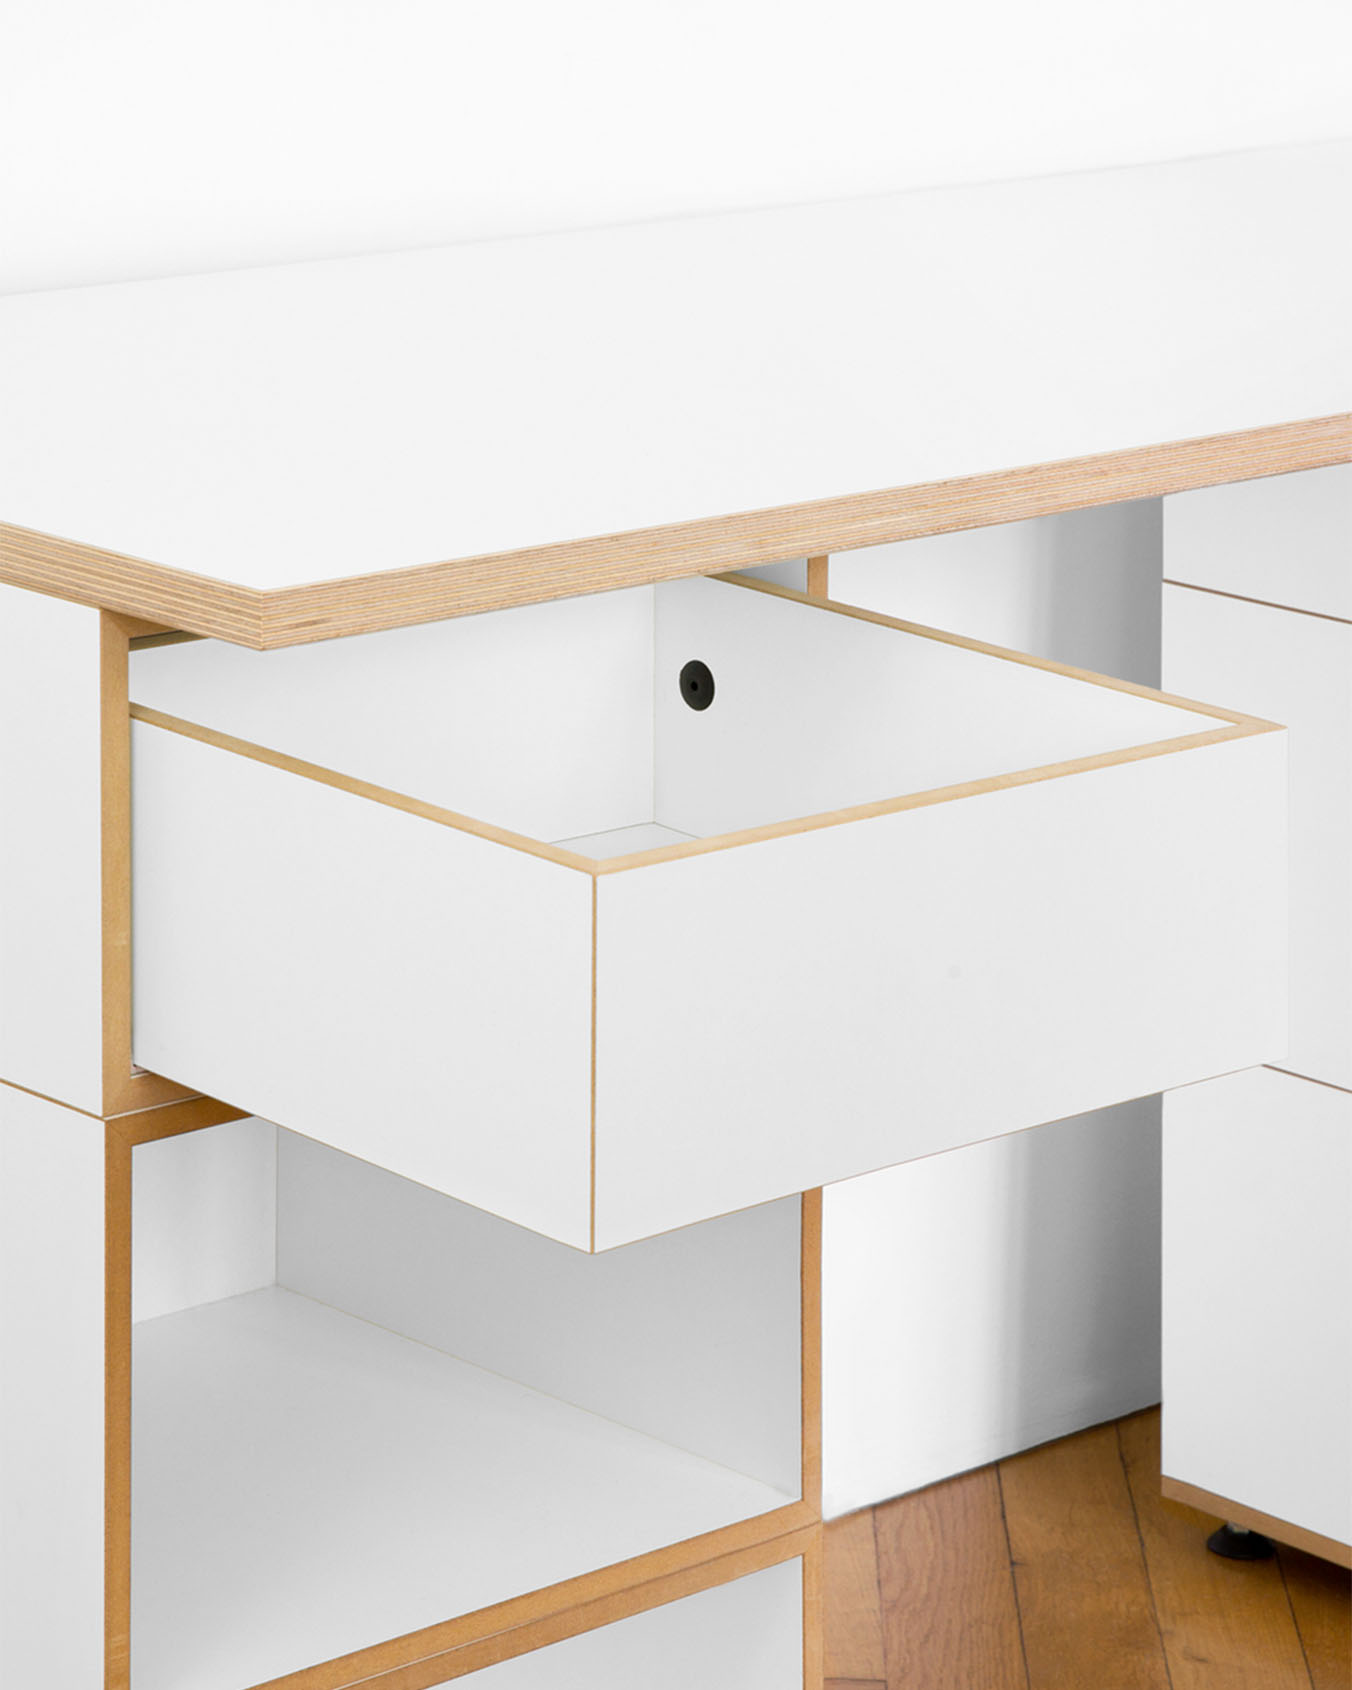 The Ultimate Guide to Finding the Perfect Children’s Desk